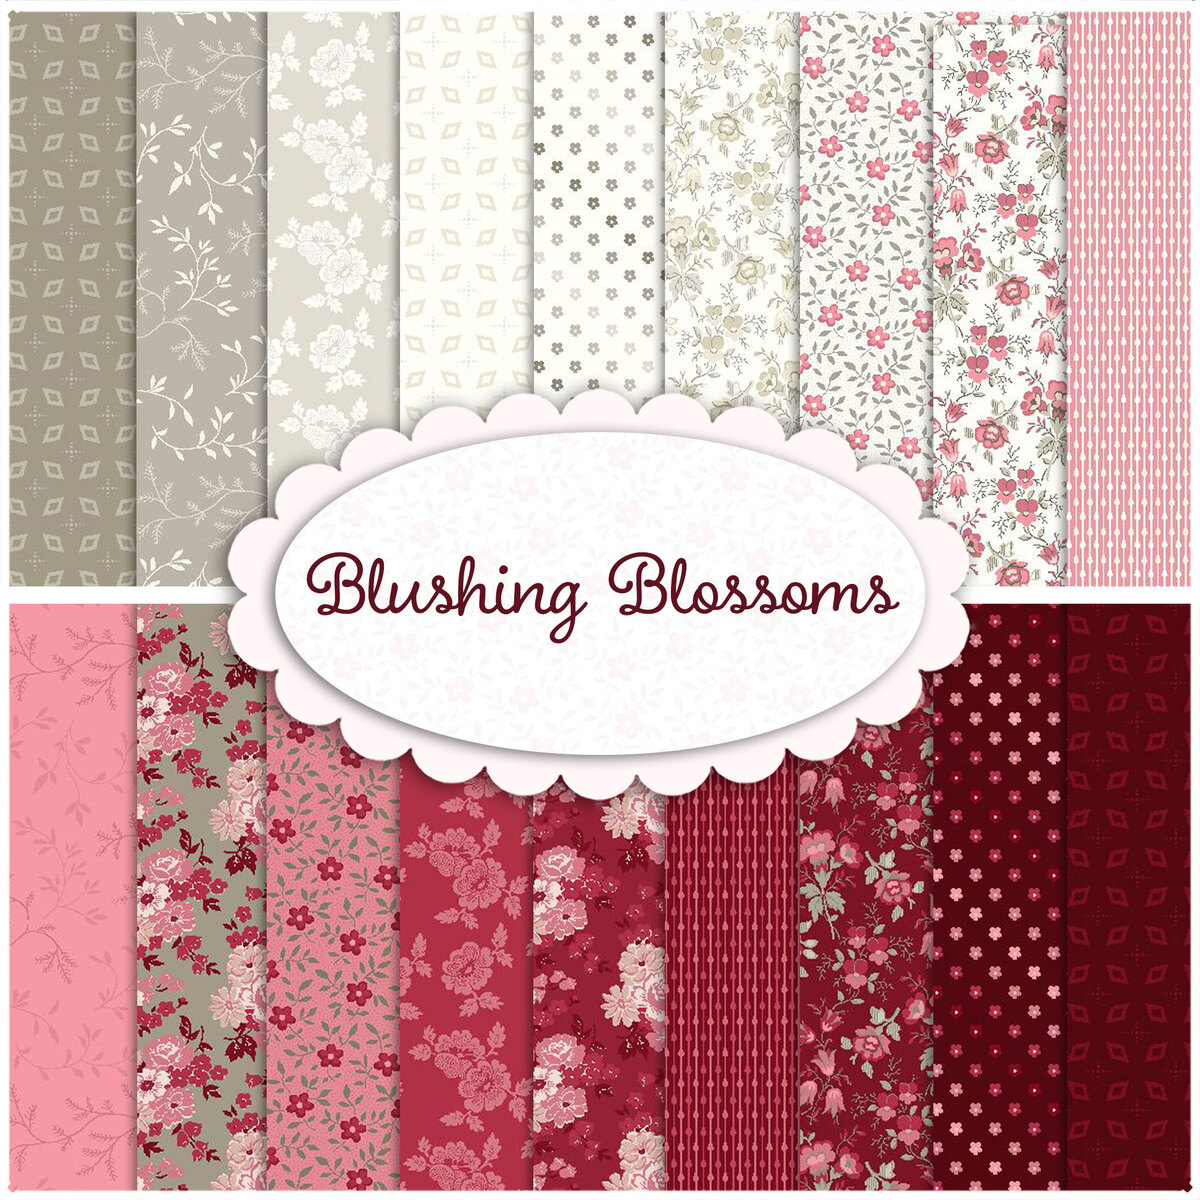 Blushing Blooms 18 FQ Set by Kaye England for Wilmington Prints ...